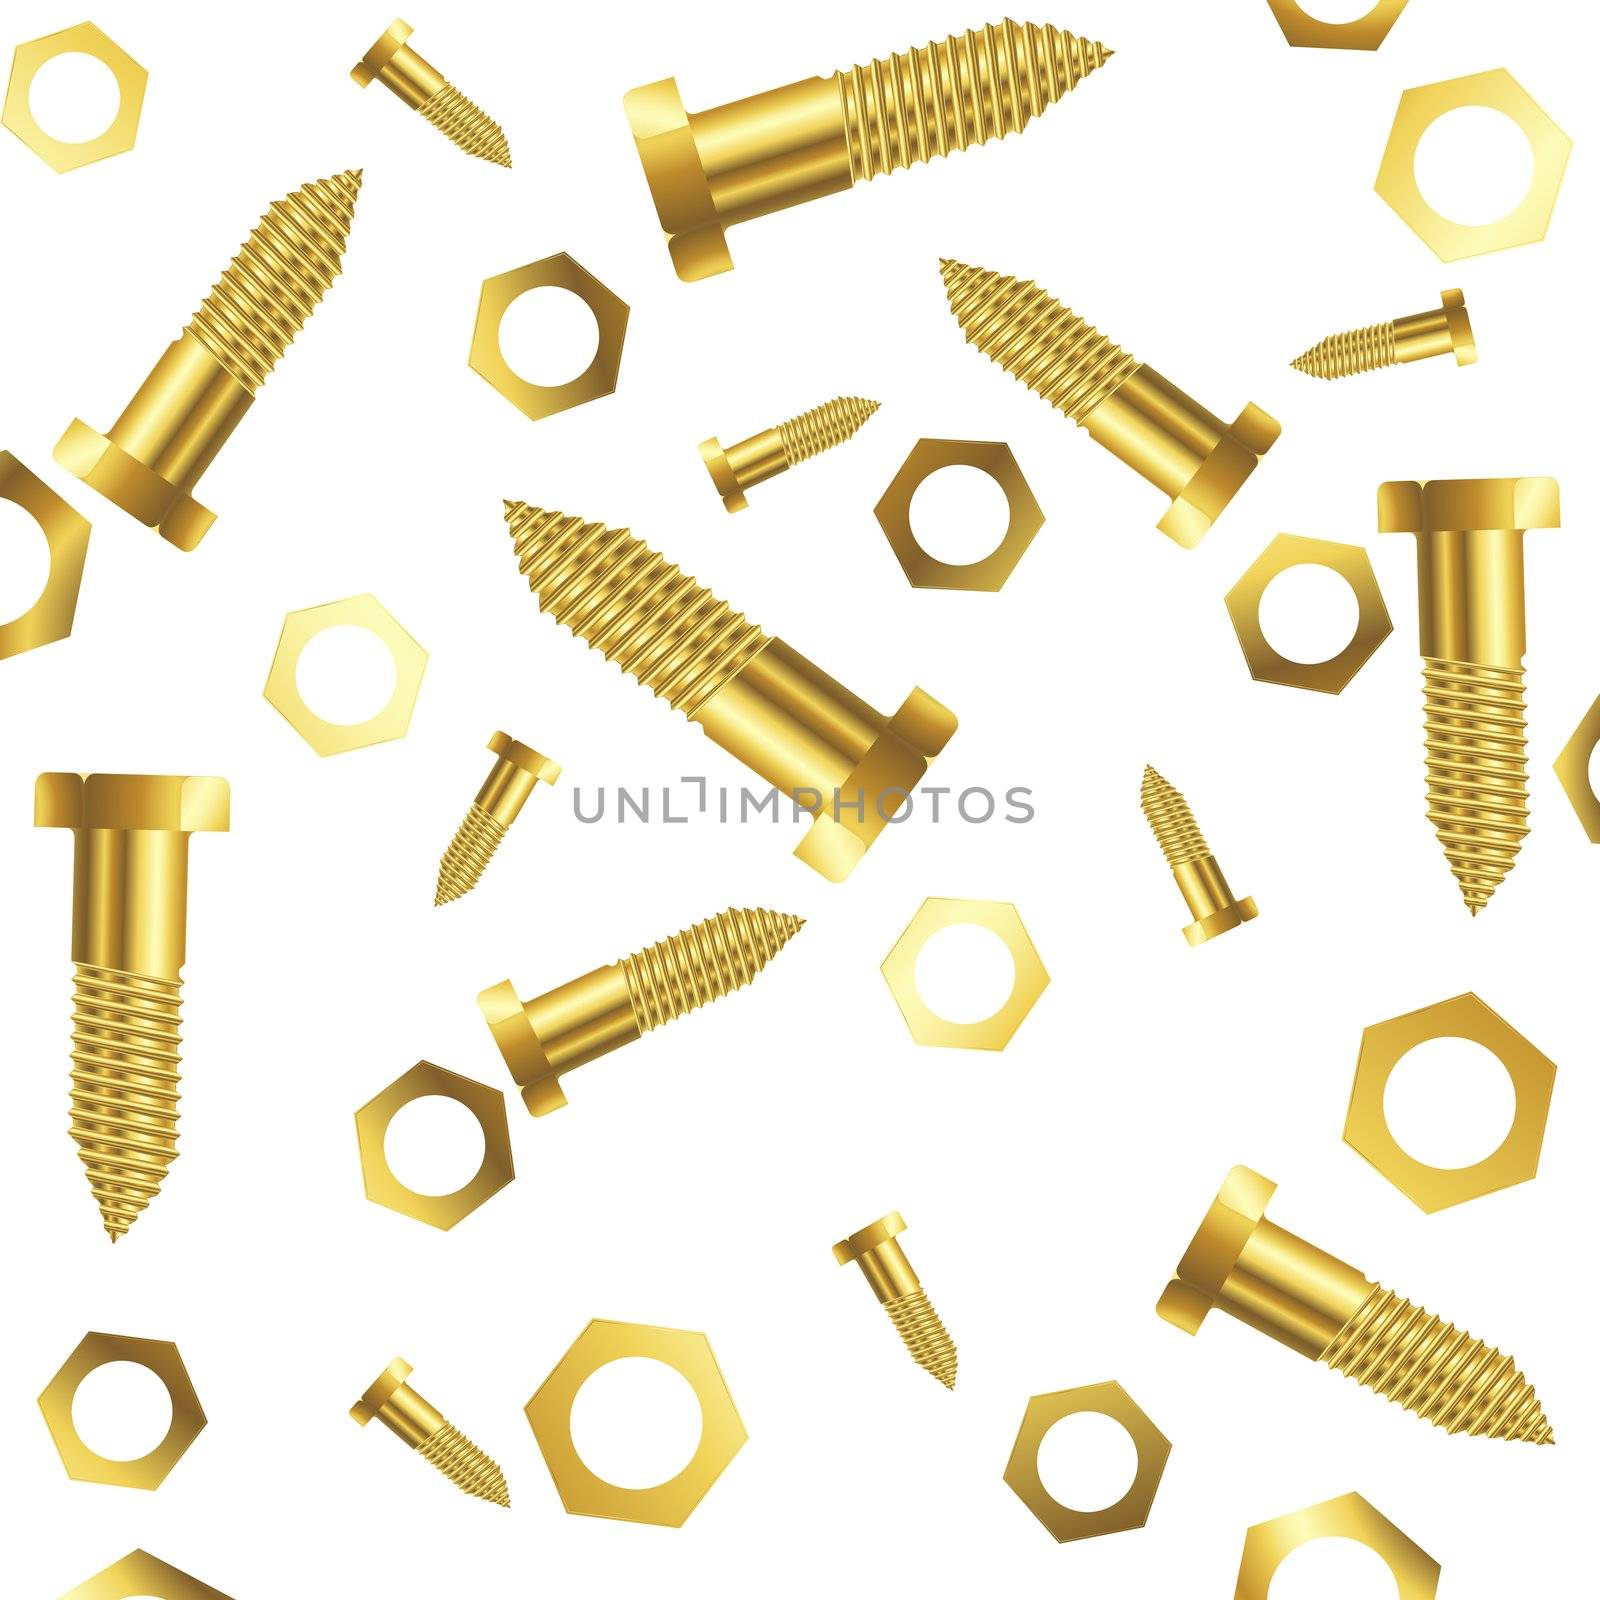 screws and nuts over white background, abstract art illustration